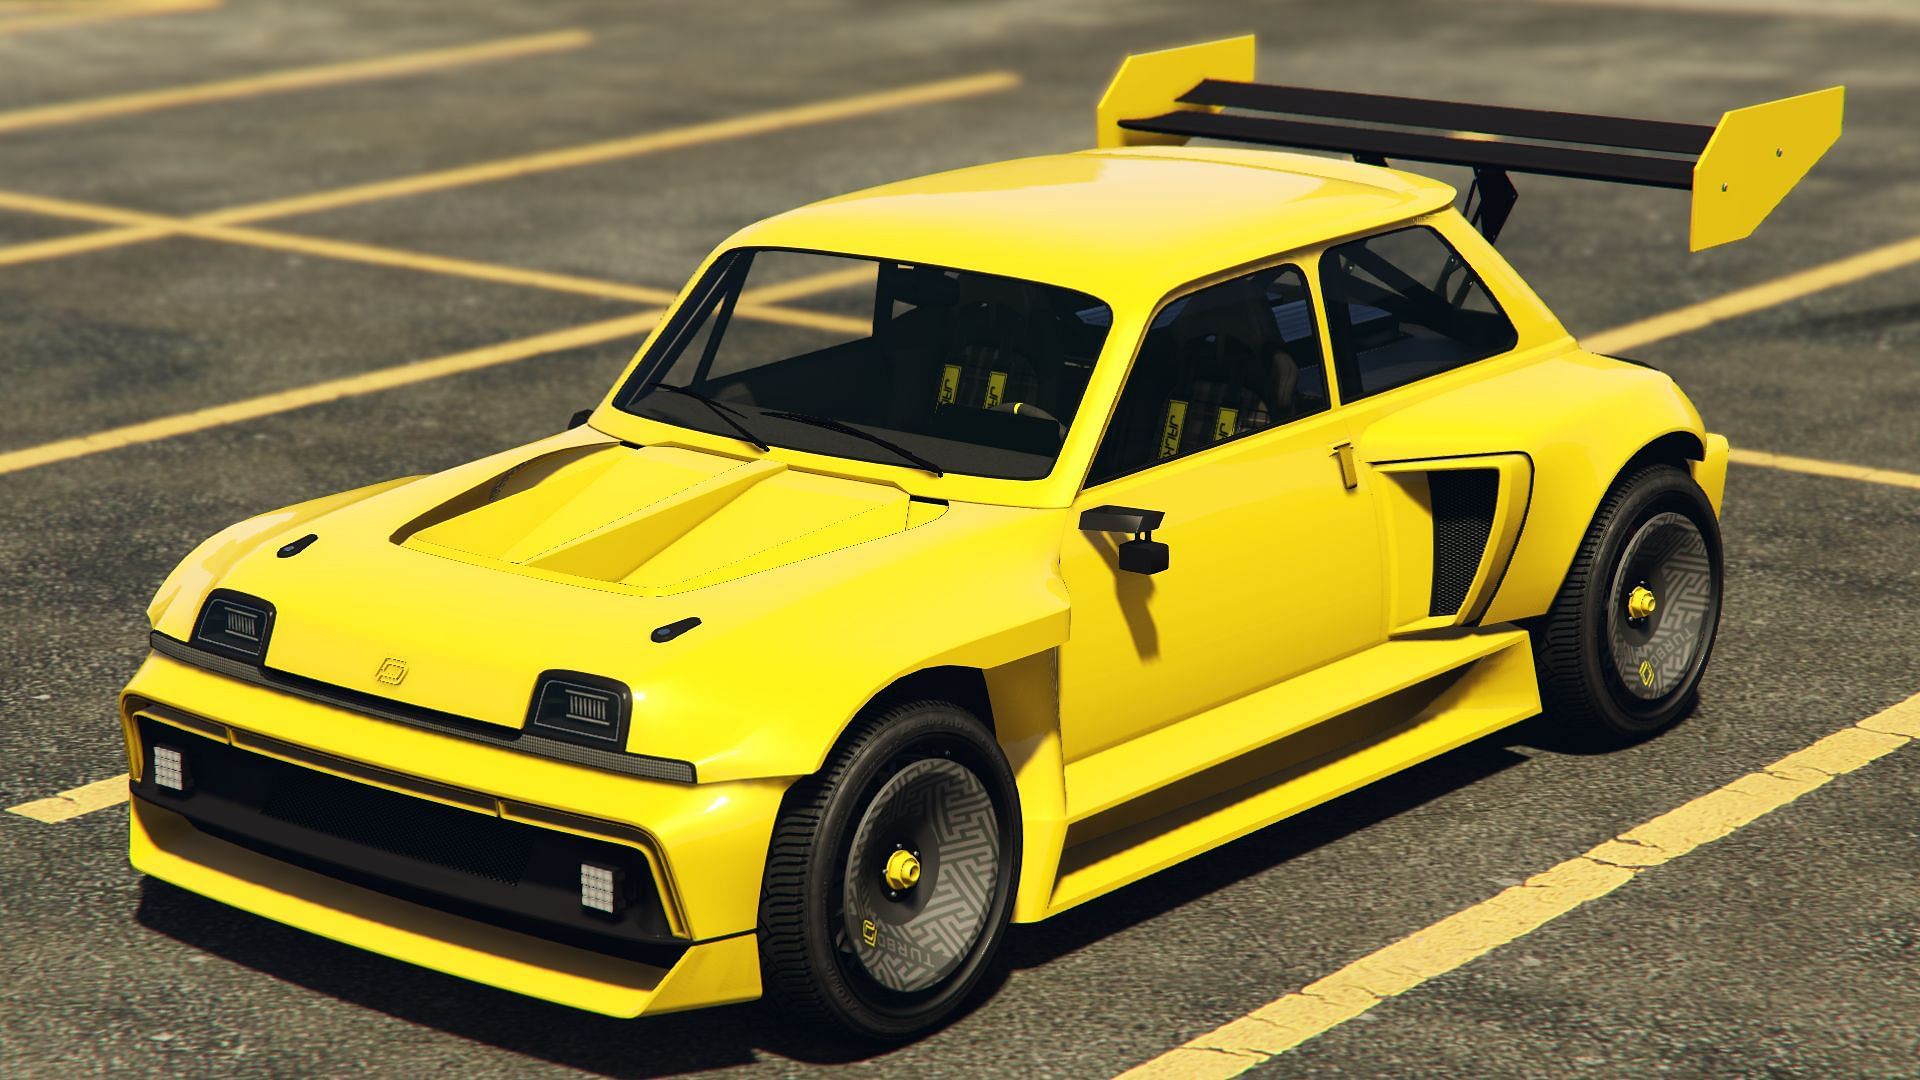 The Penaud La Coureuse is one of the new cars to be released in the future (Image via GTA Wiki)